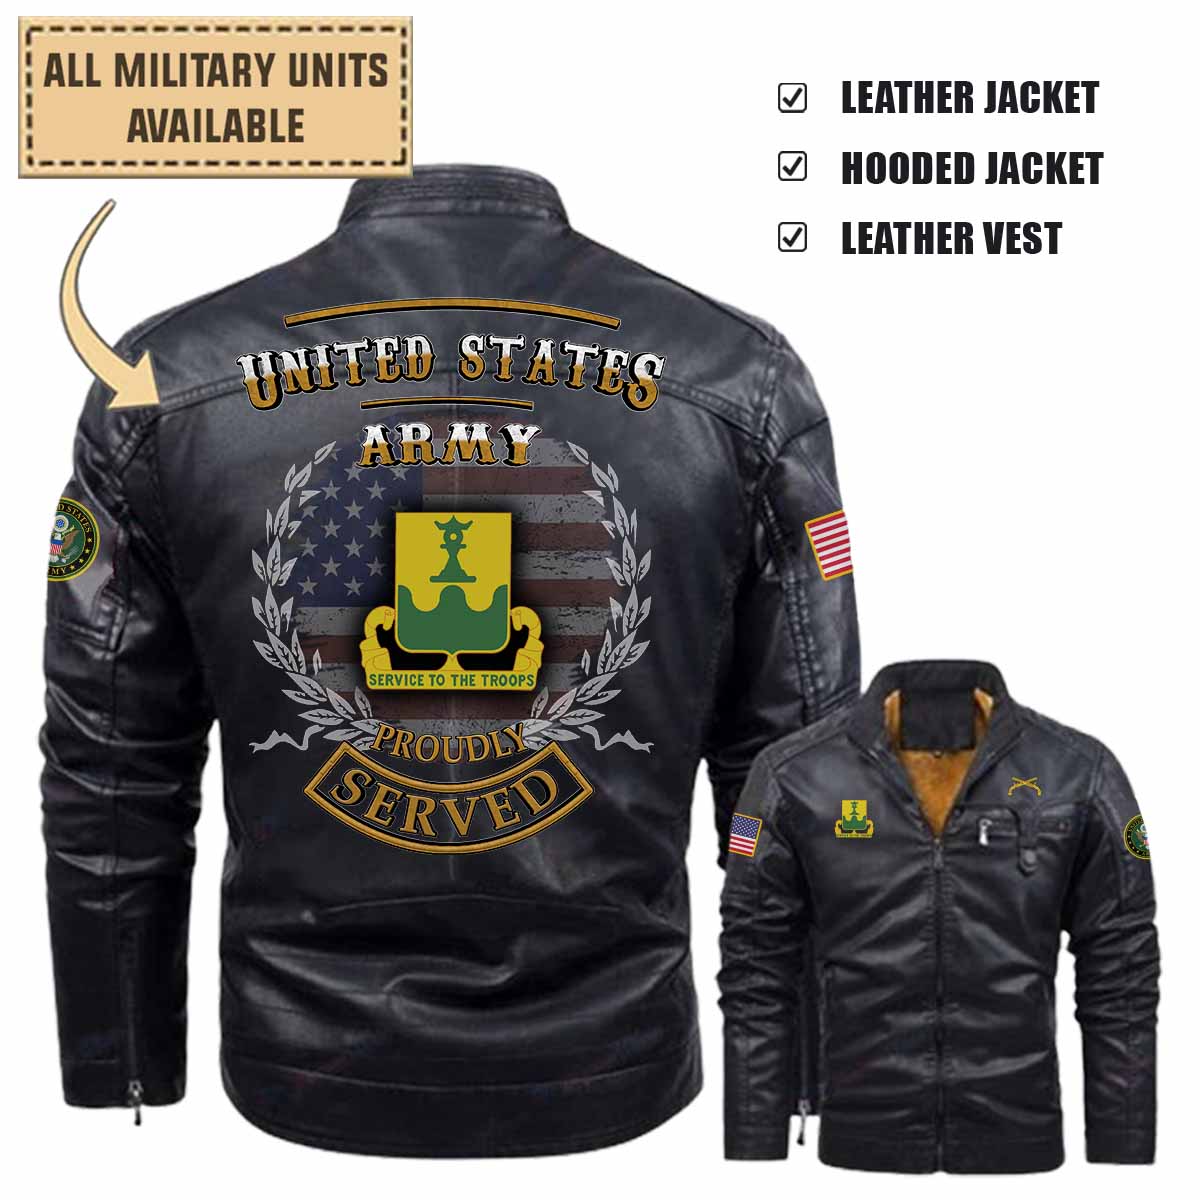 519th MP BN 519th Military Police Battalion_Military Leather Jacket and Vest